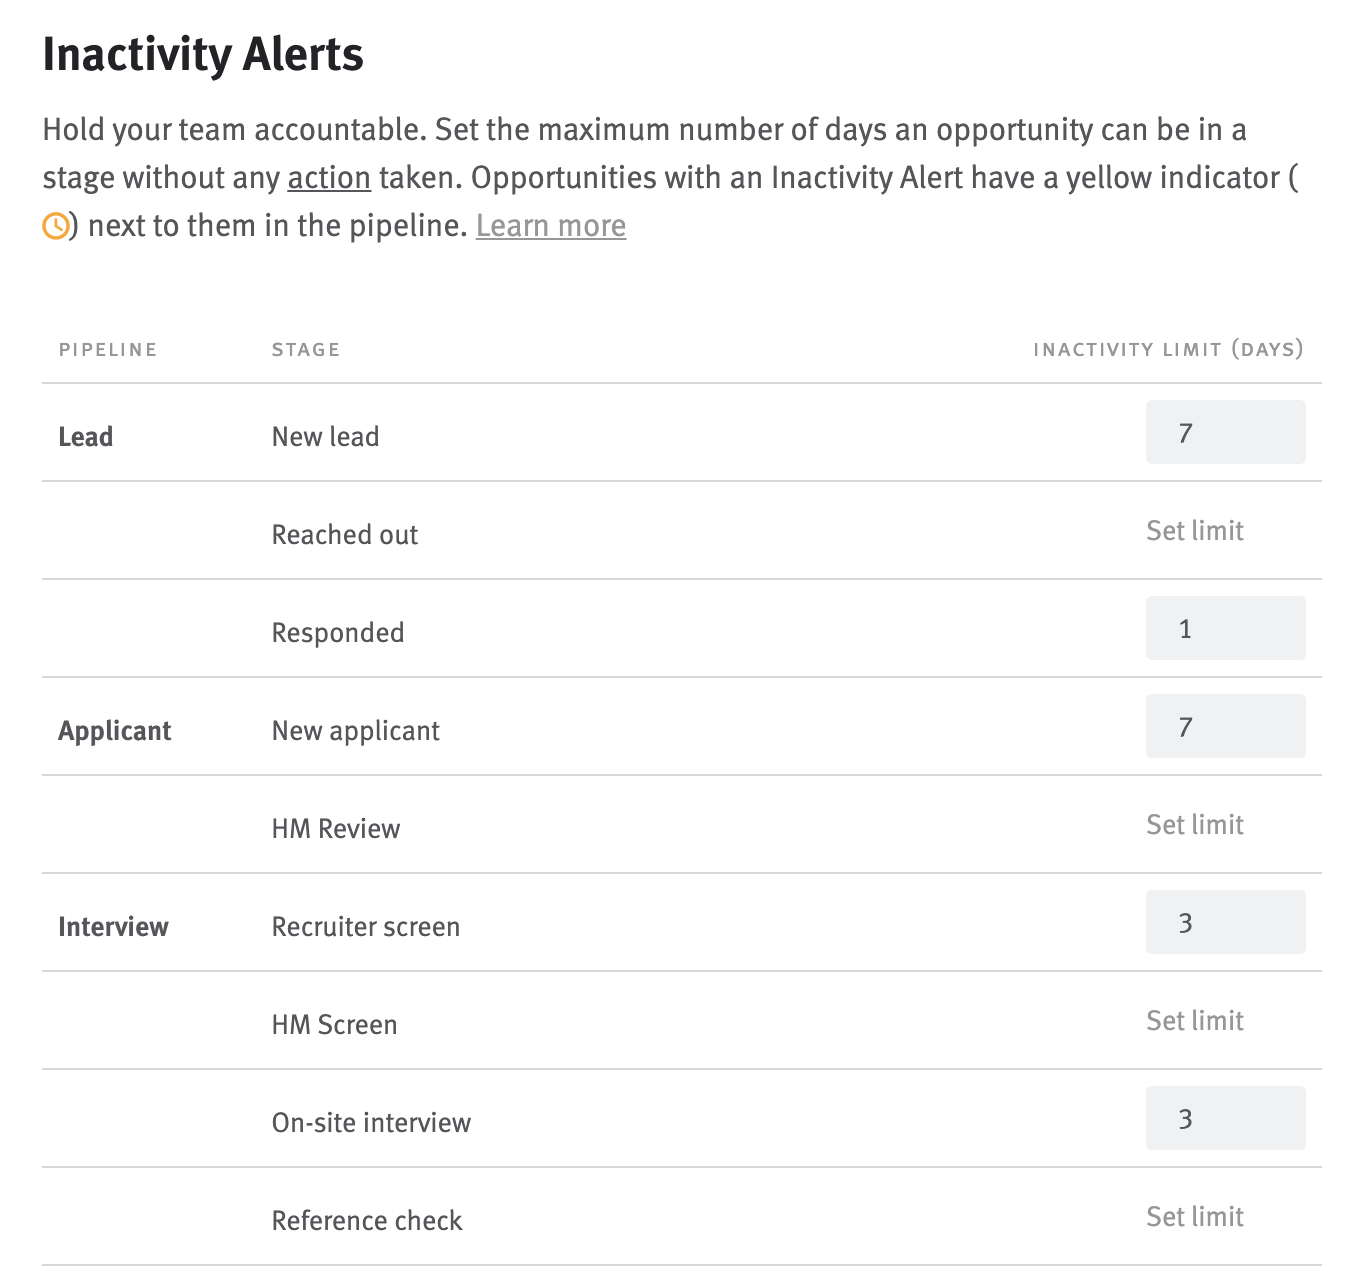 Inactivity alerts configuration in Account Settings.